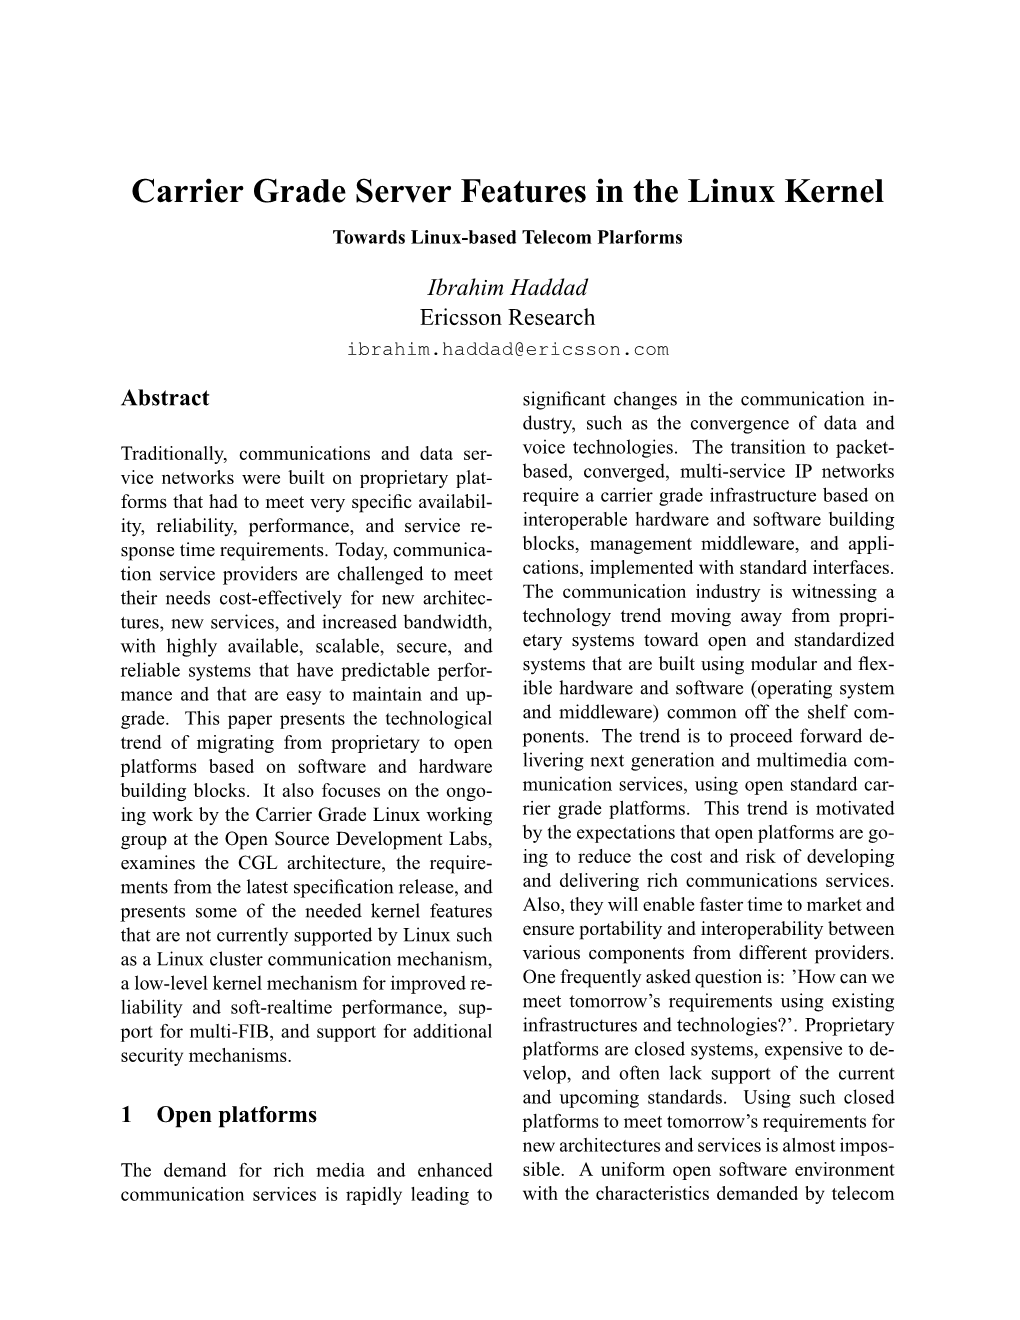 Carrier Grade Server Features in the Linux Kernel Towards Linux-Based Telecom Plarforms